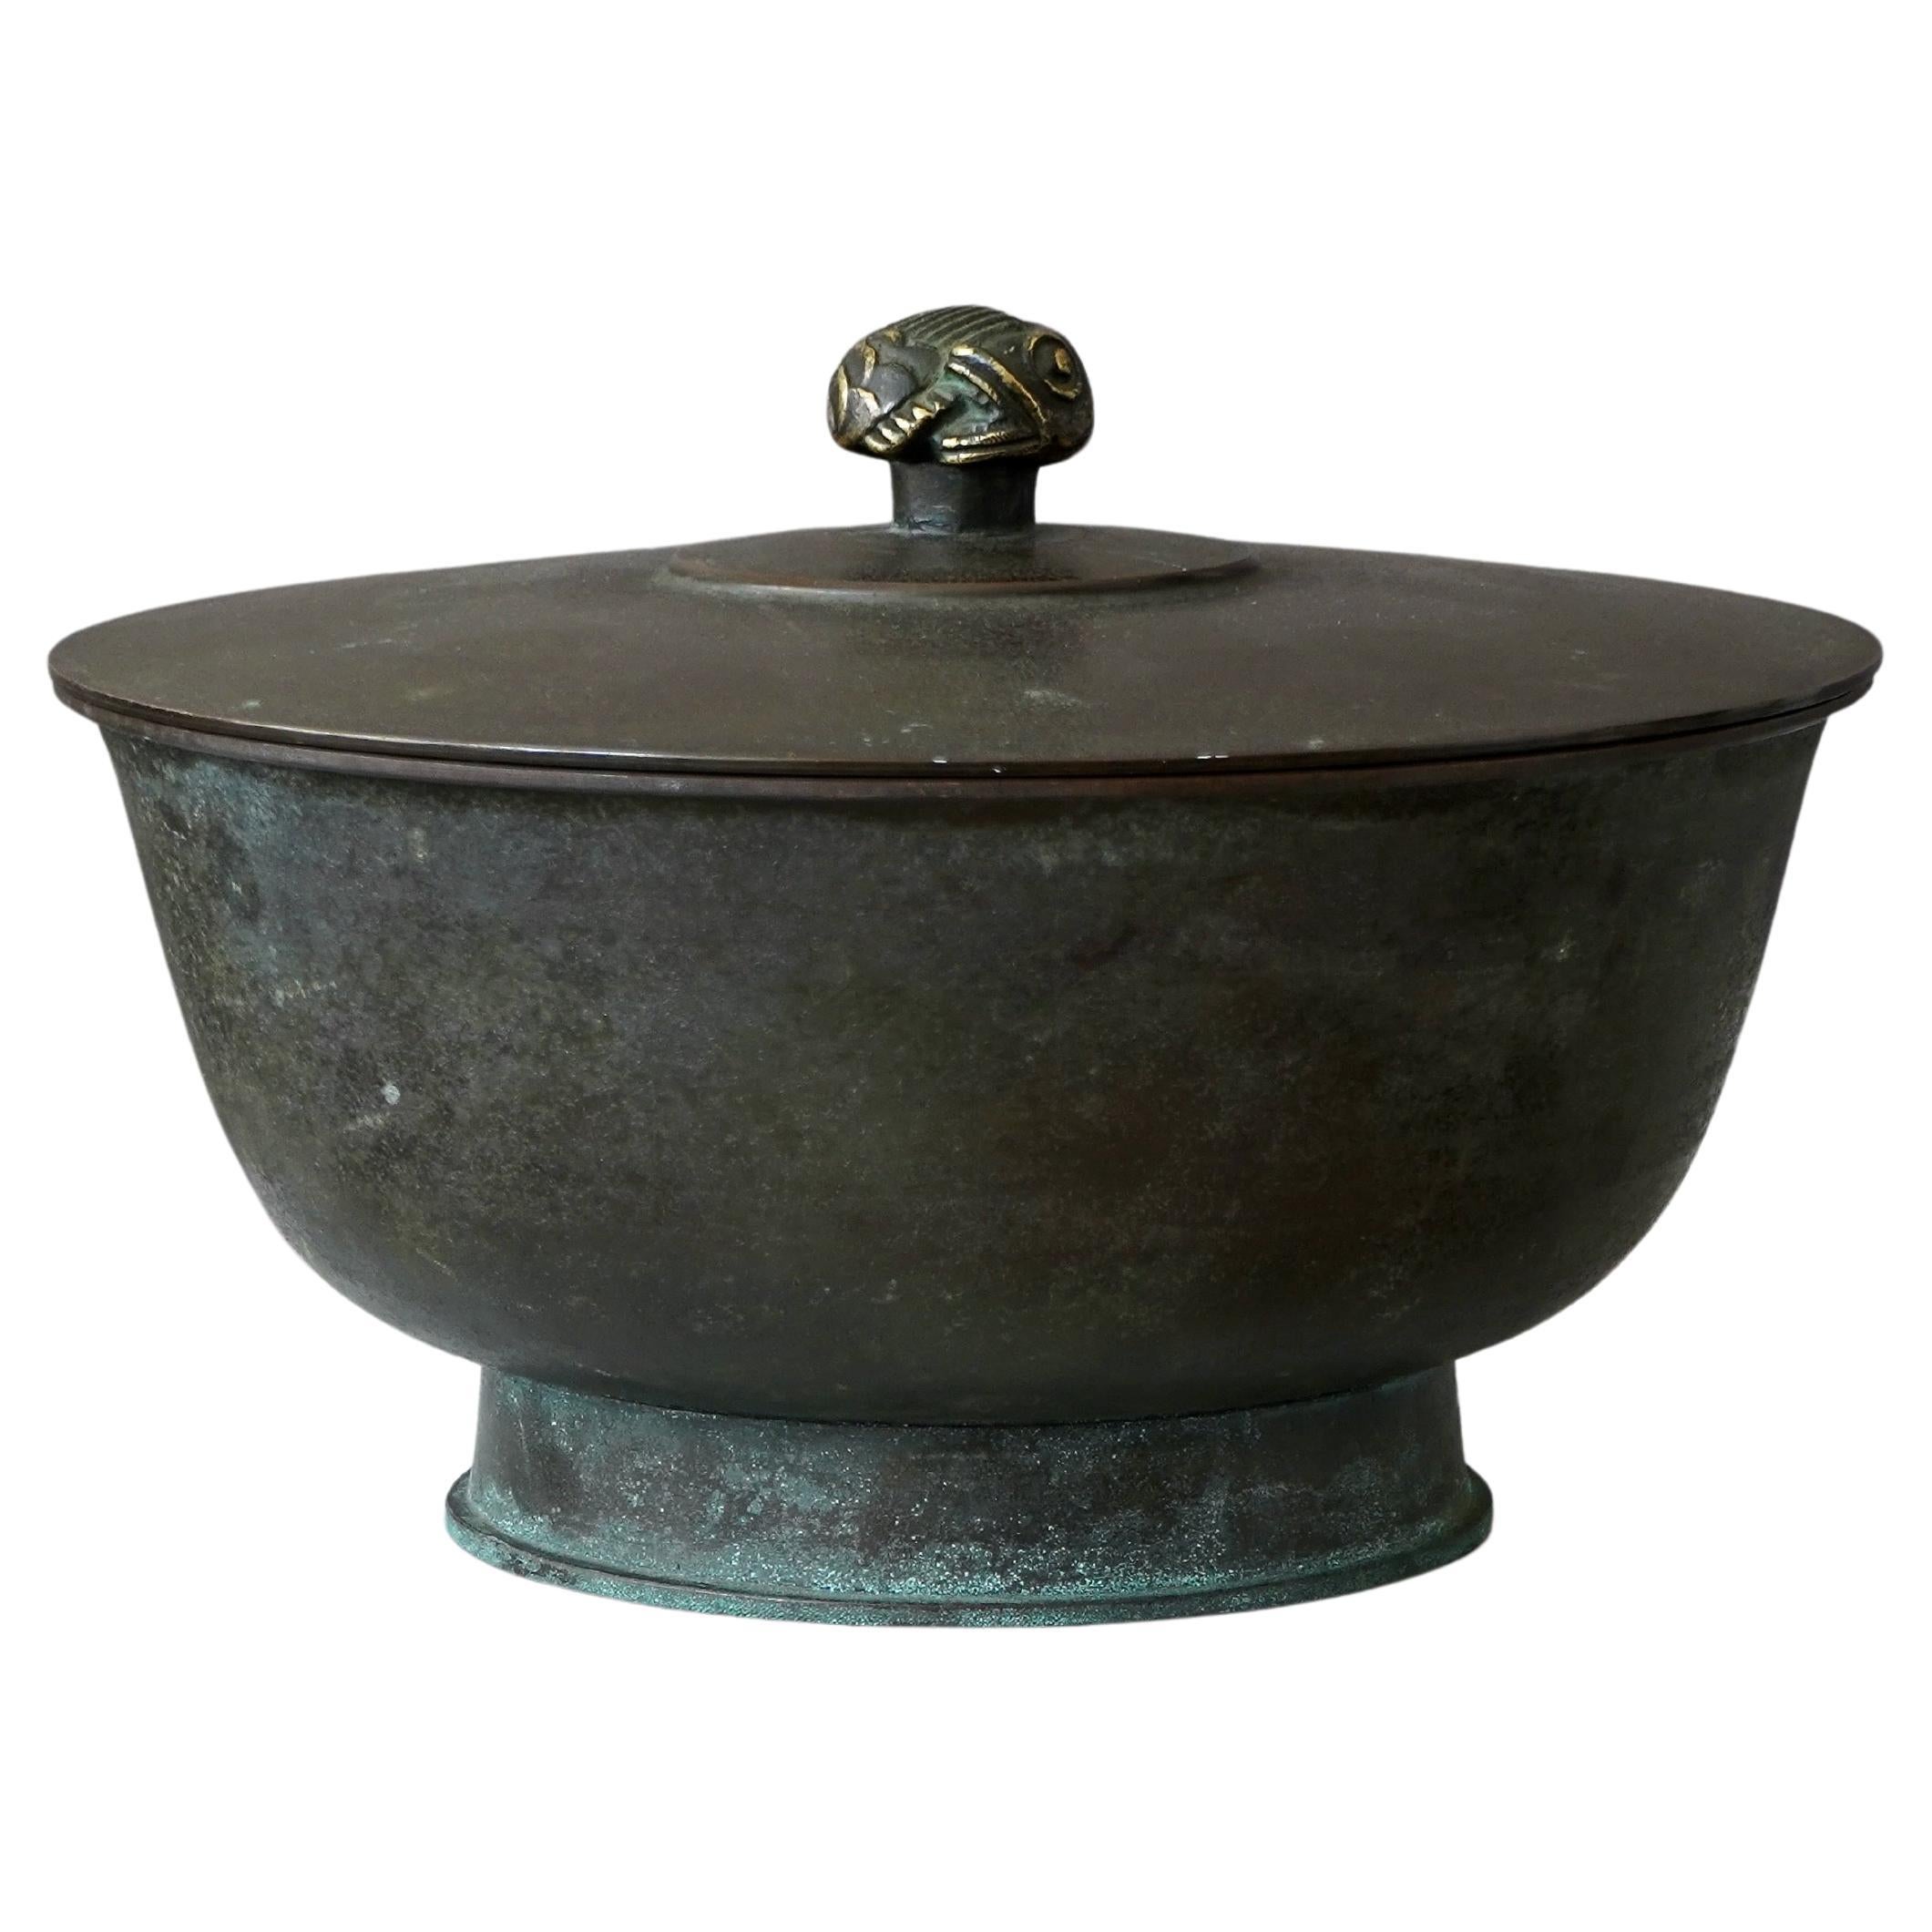 Lidded Bronze Box by Hans Bergstrom for Ystad Metall / Brons, Sweden, 1930s For Sale